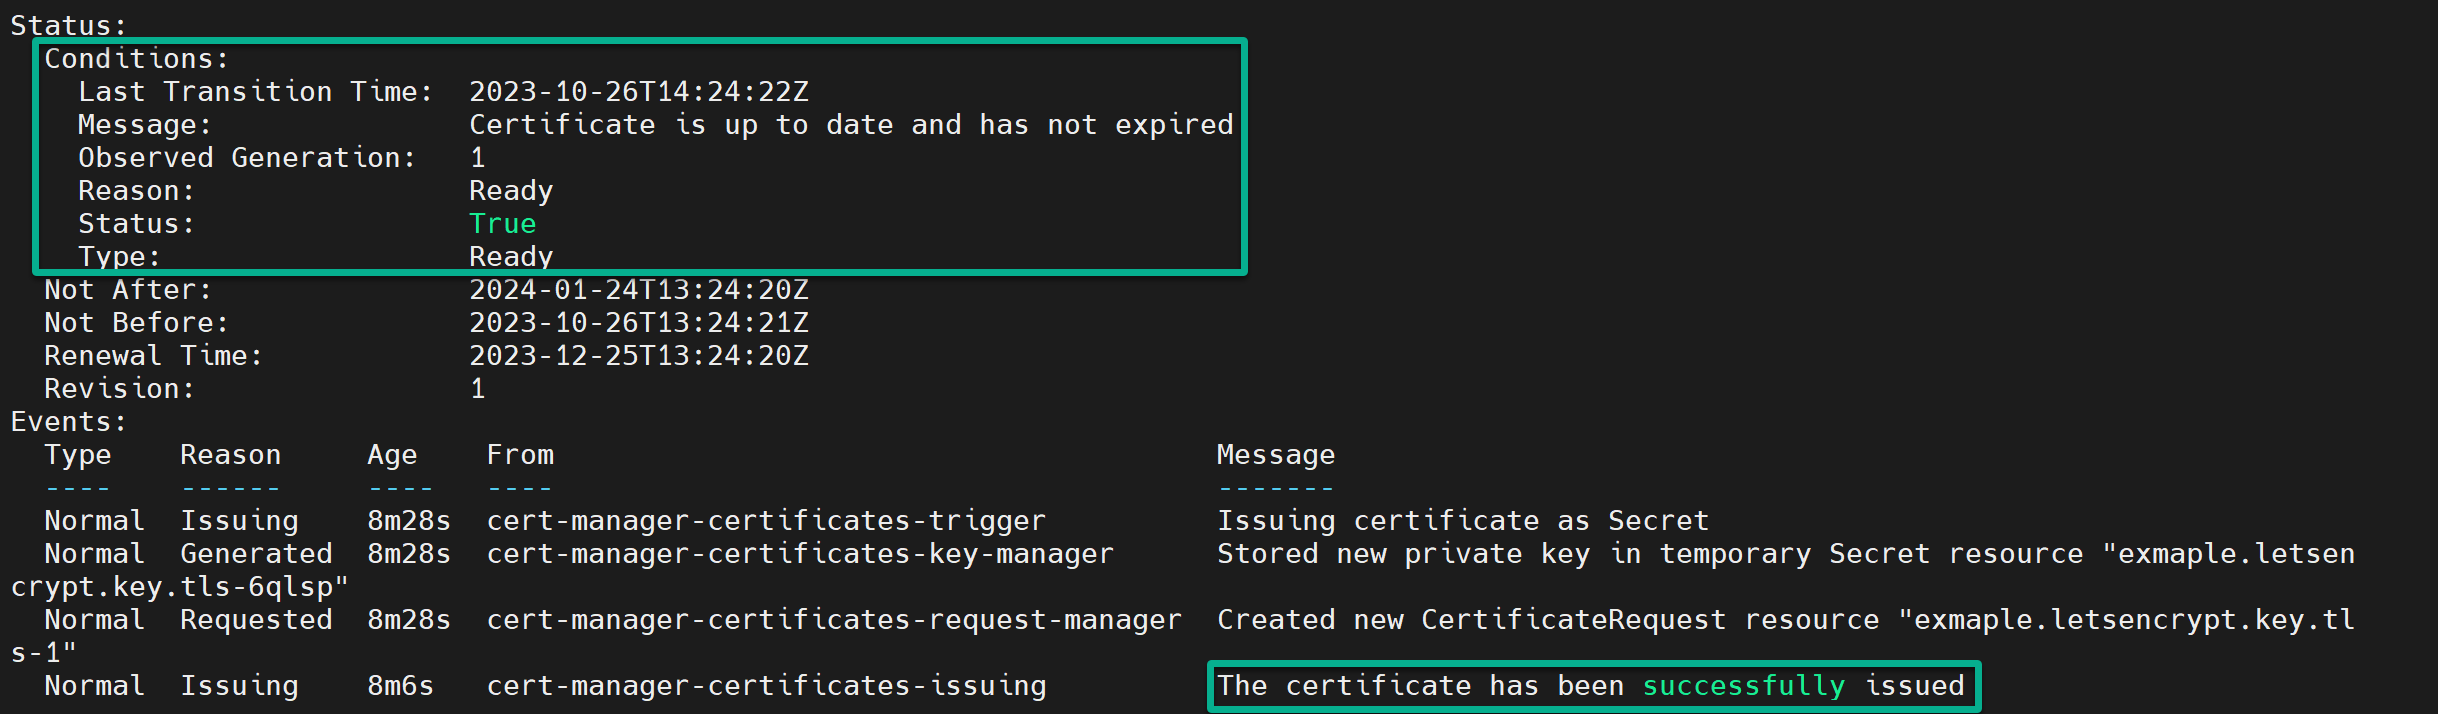 Verifying the cert-manager is ready to route traffic to the k3s cluster